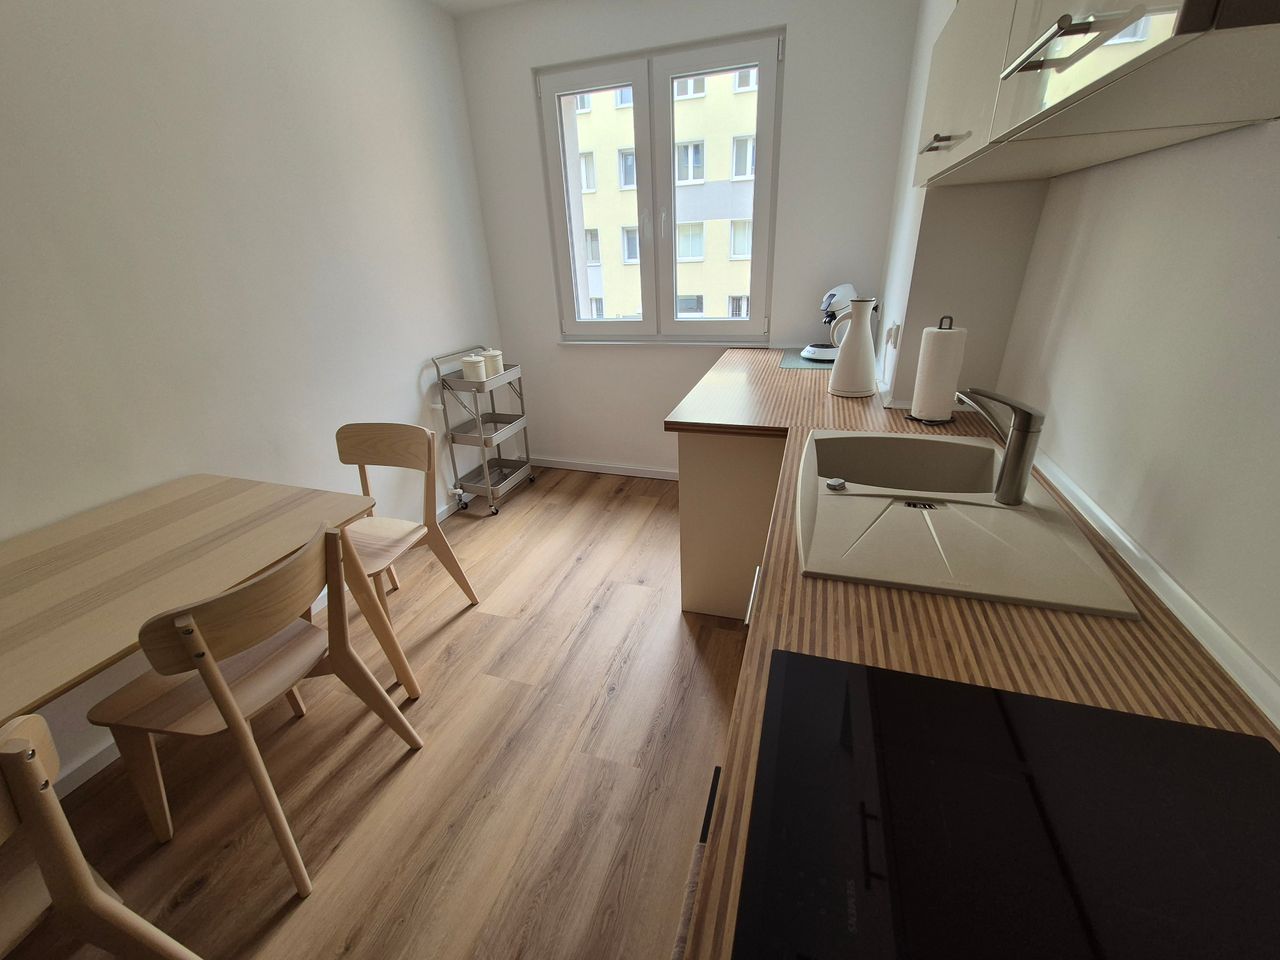 Old becomes new - Apartment in Essen city centre